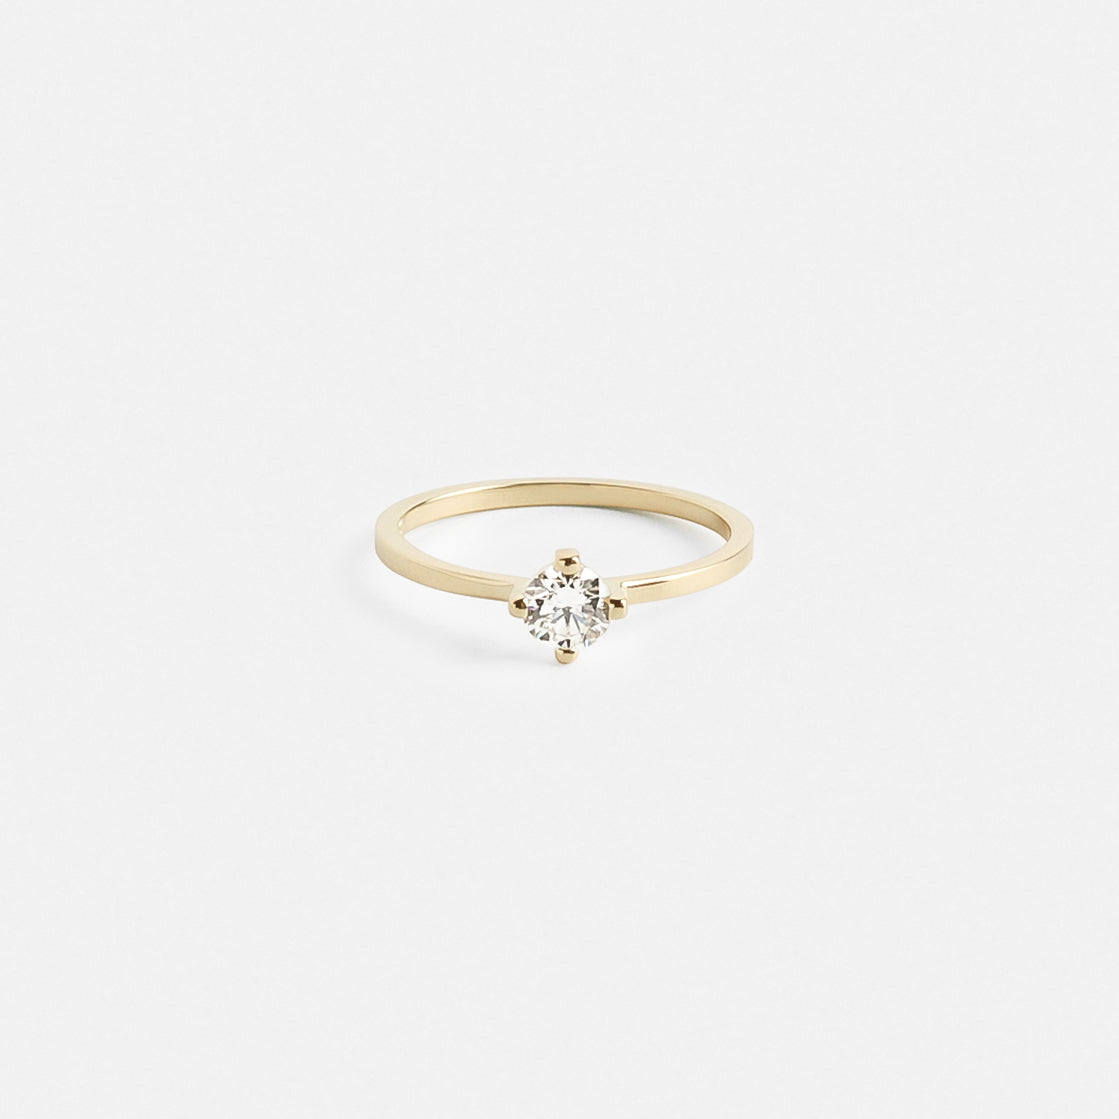 Mini Stackable Ema Ring in 14k Gold set with a 0.4ct round brilliant cut natural diamond By SHW Fine Jewelry NYC